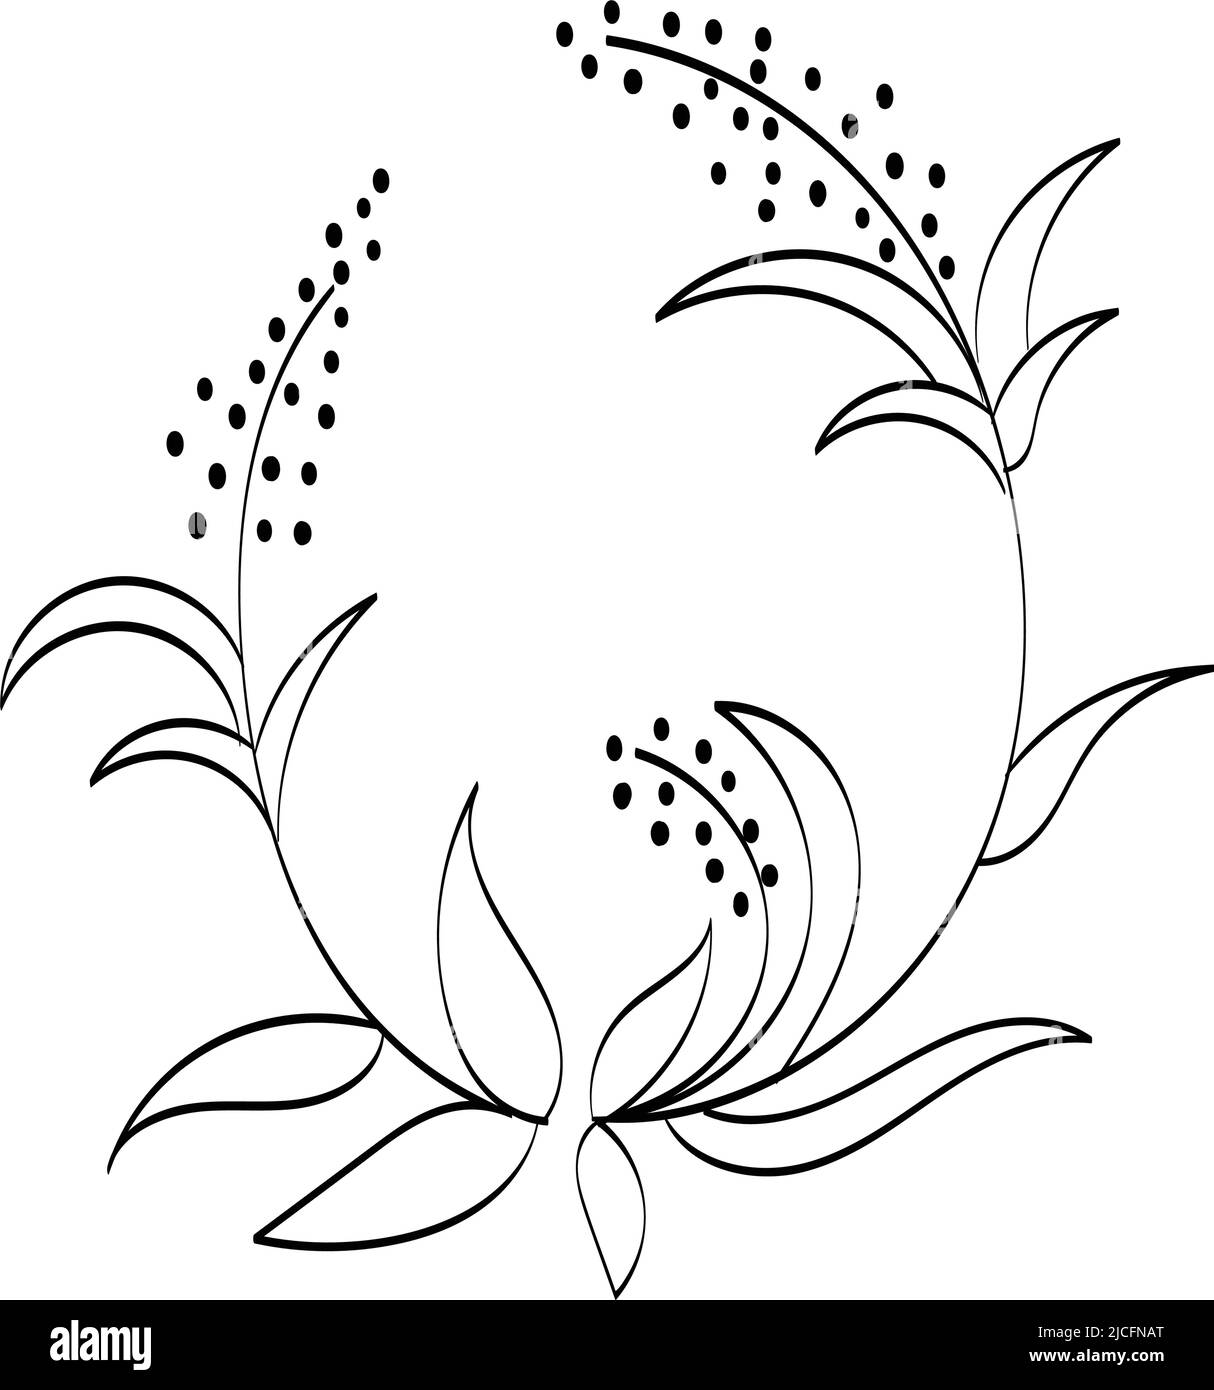 Abstract Flower. Printable flower Embroidery pattern design Stock ...